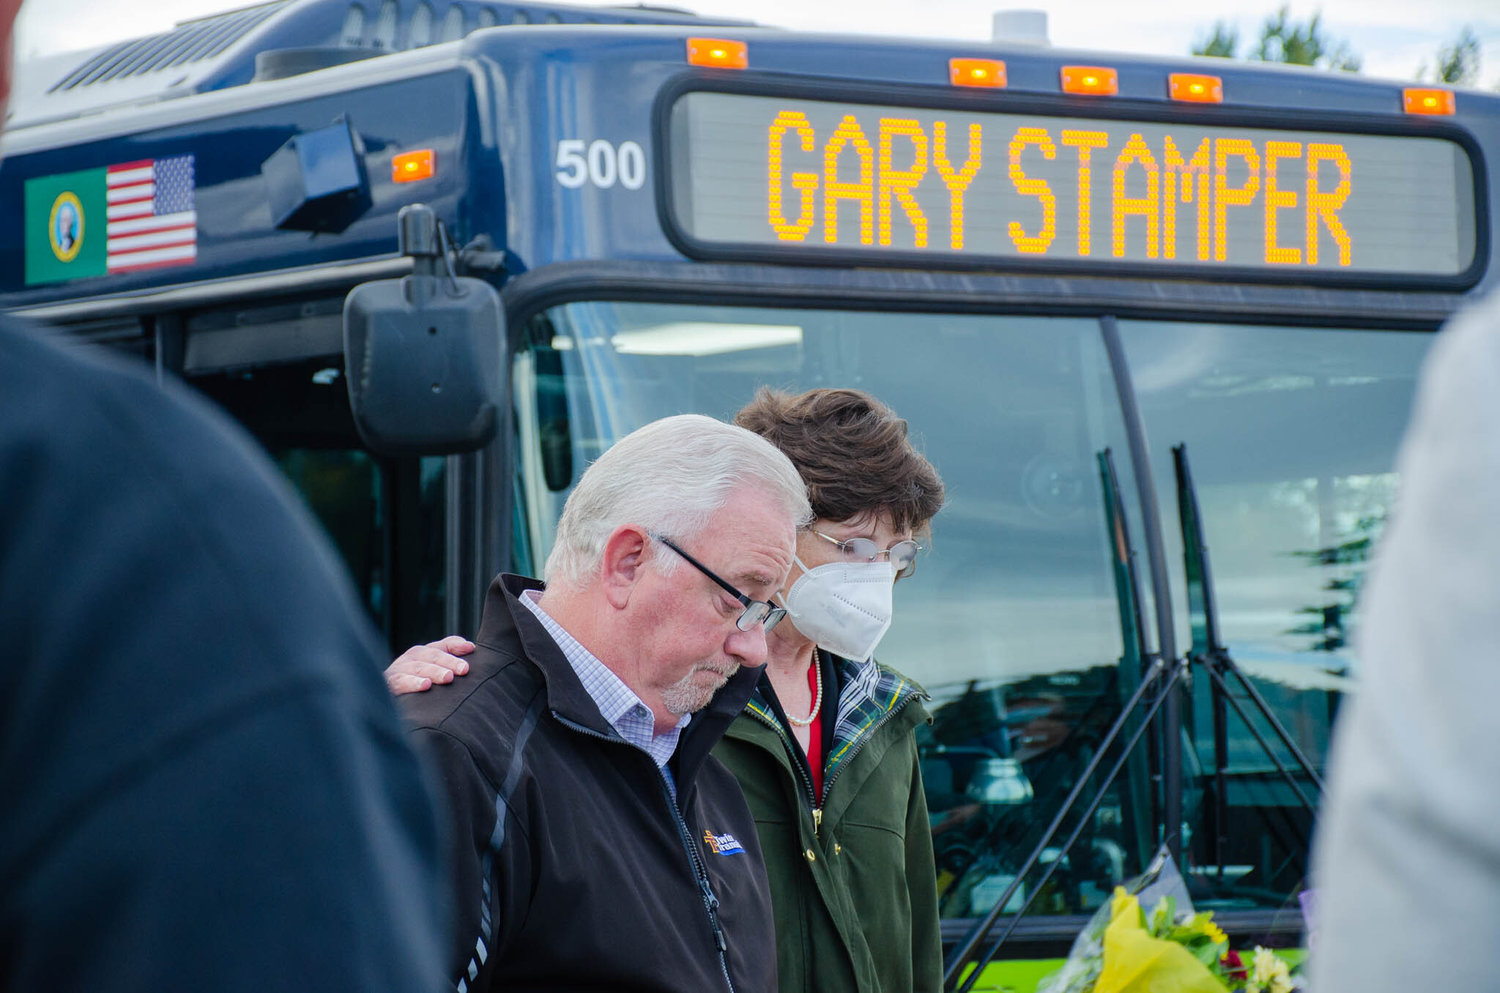 Lewis County Commissioner Lindsey Pollock embraces Twin Transit Executive Director Joe Clark Thursday morning during a remembrance ceremony for Gary Stamper, the senior county commissioner who died Wednesday.